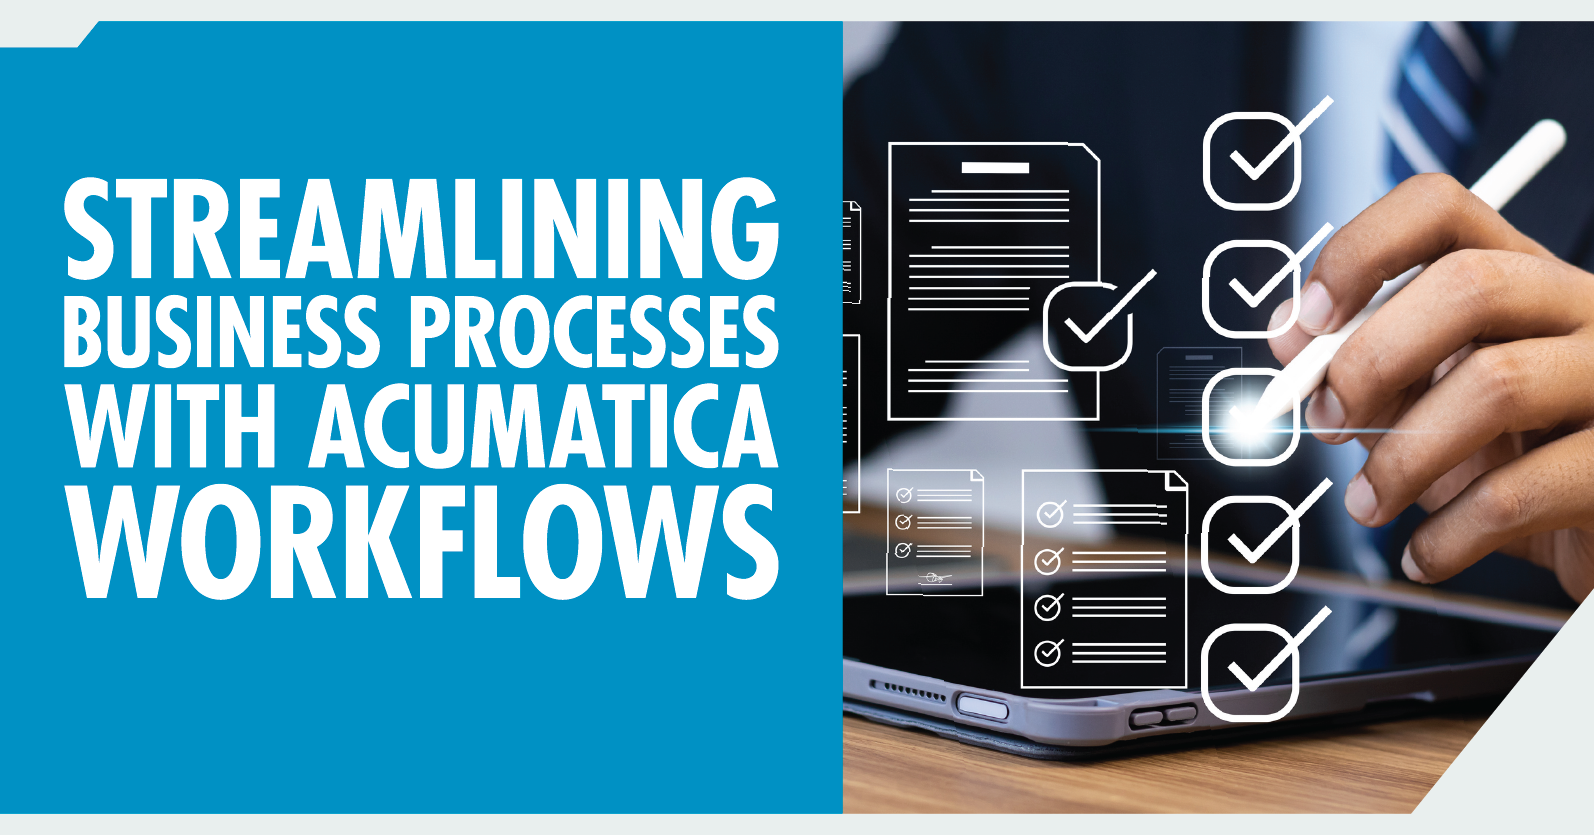 Streamlining Business Processes with Acumatica Workflows